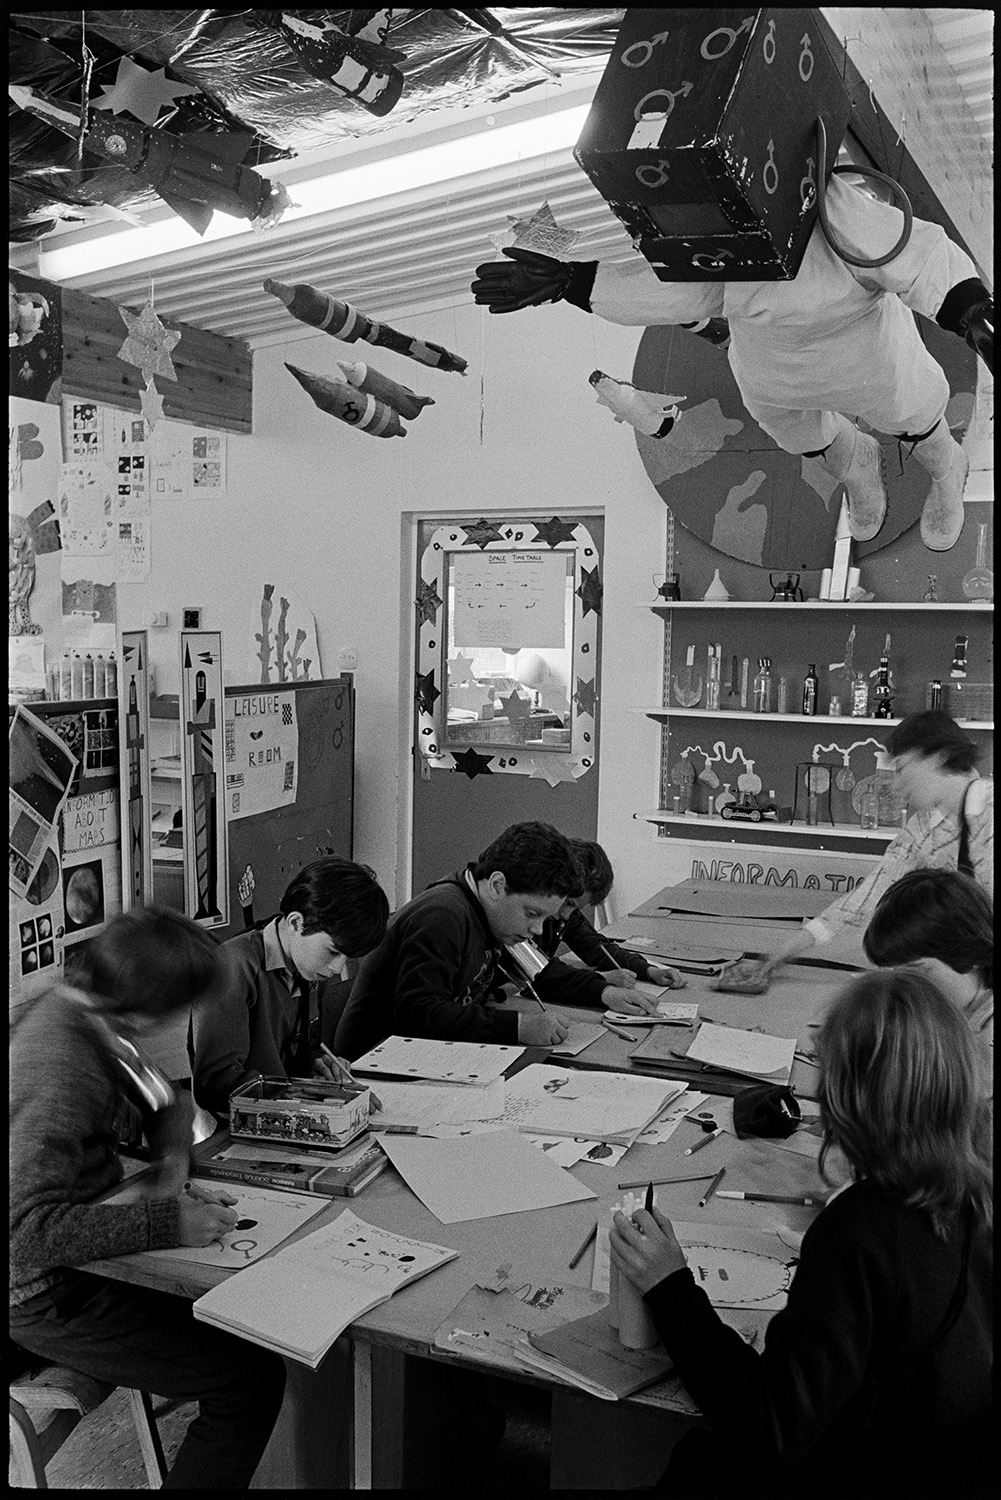 Schoolchildren working on space project pretending to be astronauts in spacecraft. 
[Boys and girls working at a desk in a classroom in Bideford Primary School, which is decorated with space themed objects, including rocket ships and an astronaut which are hung from the ceiling.